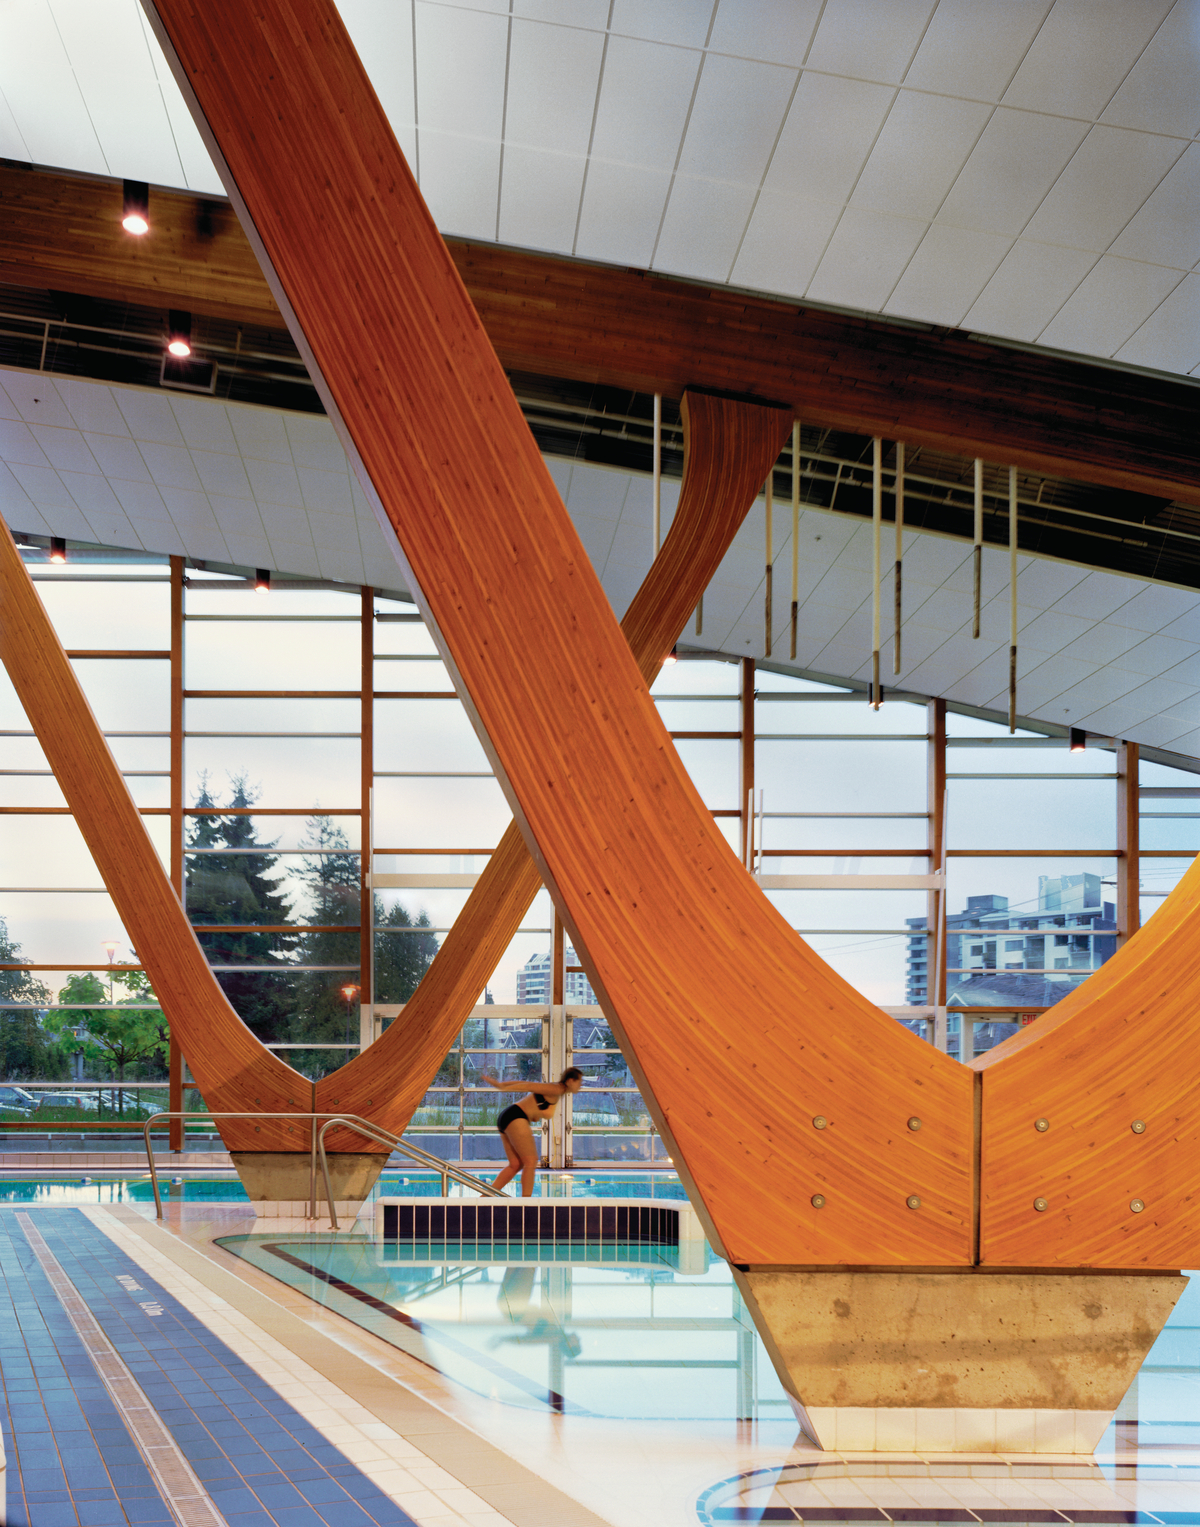 Interior daytime view of low rise West Vancouver Aquatic Centre showing pool surface, swimmer, and curved Glue-laminated timber (Glulam) columns arcing up to support Glue-laminated timber (Glulam) roof beams